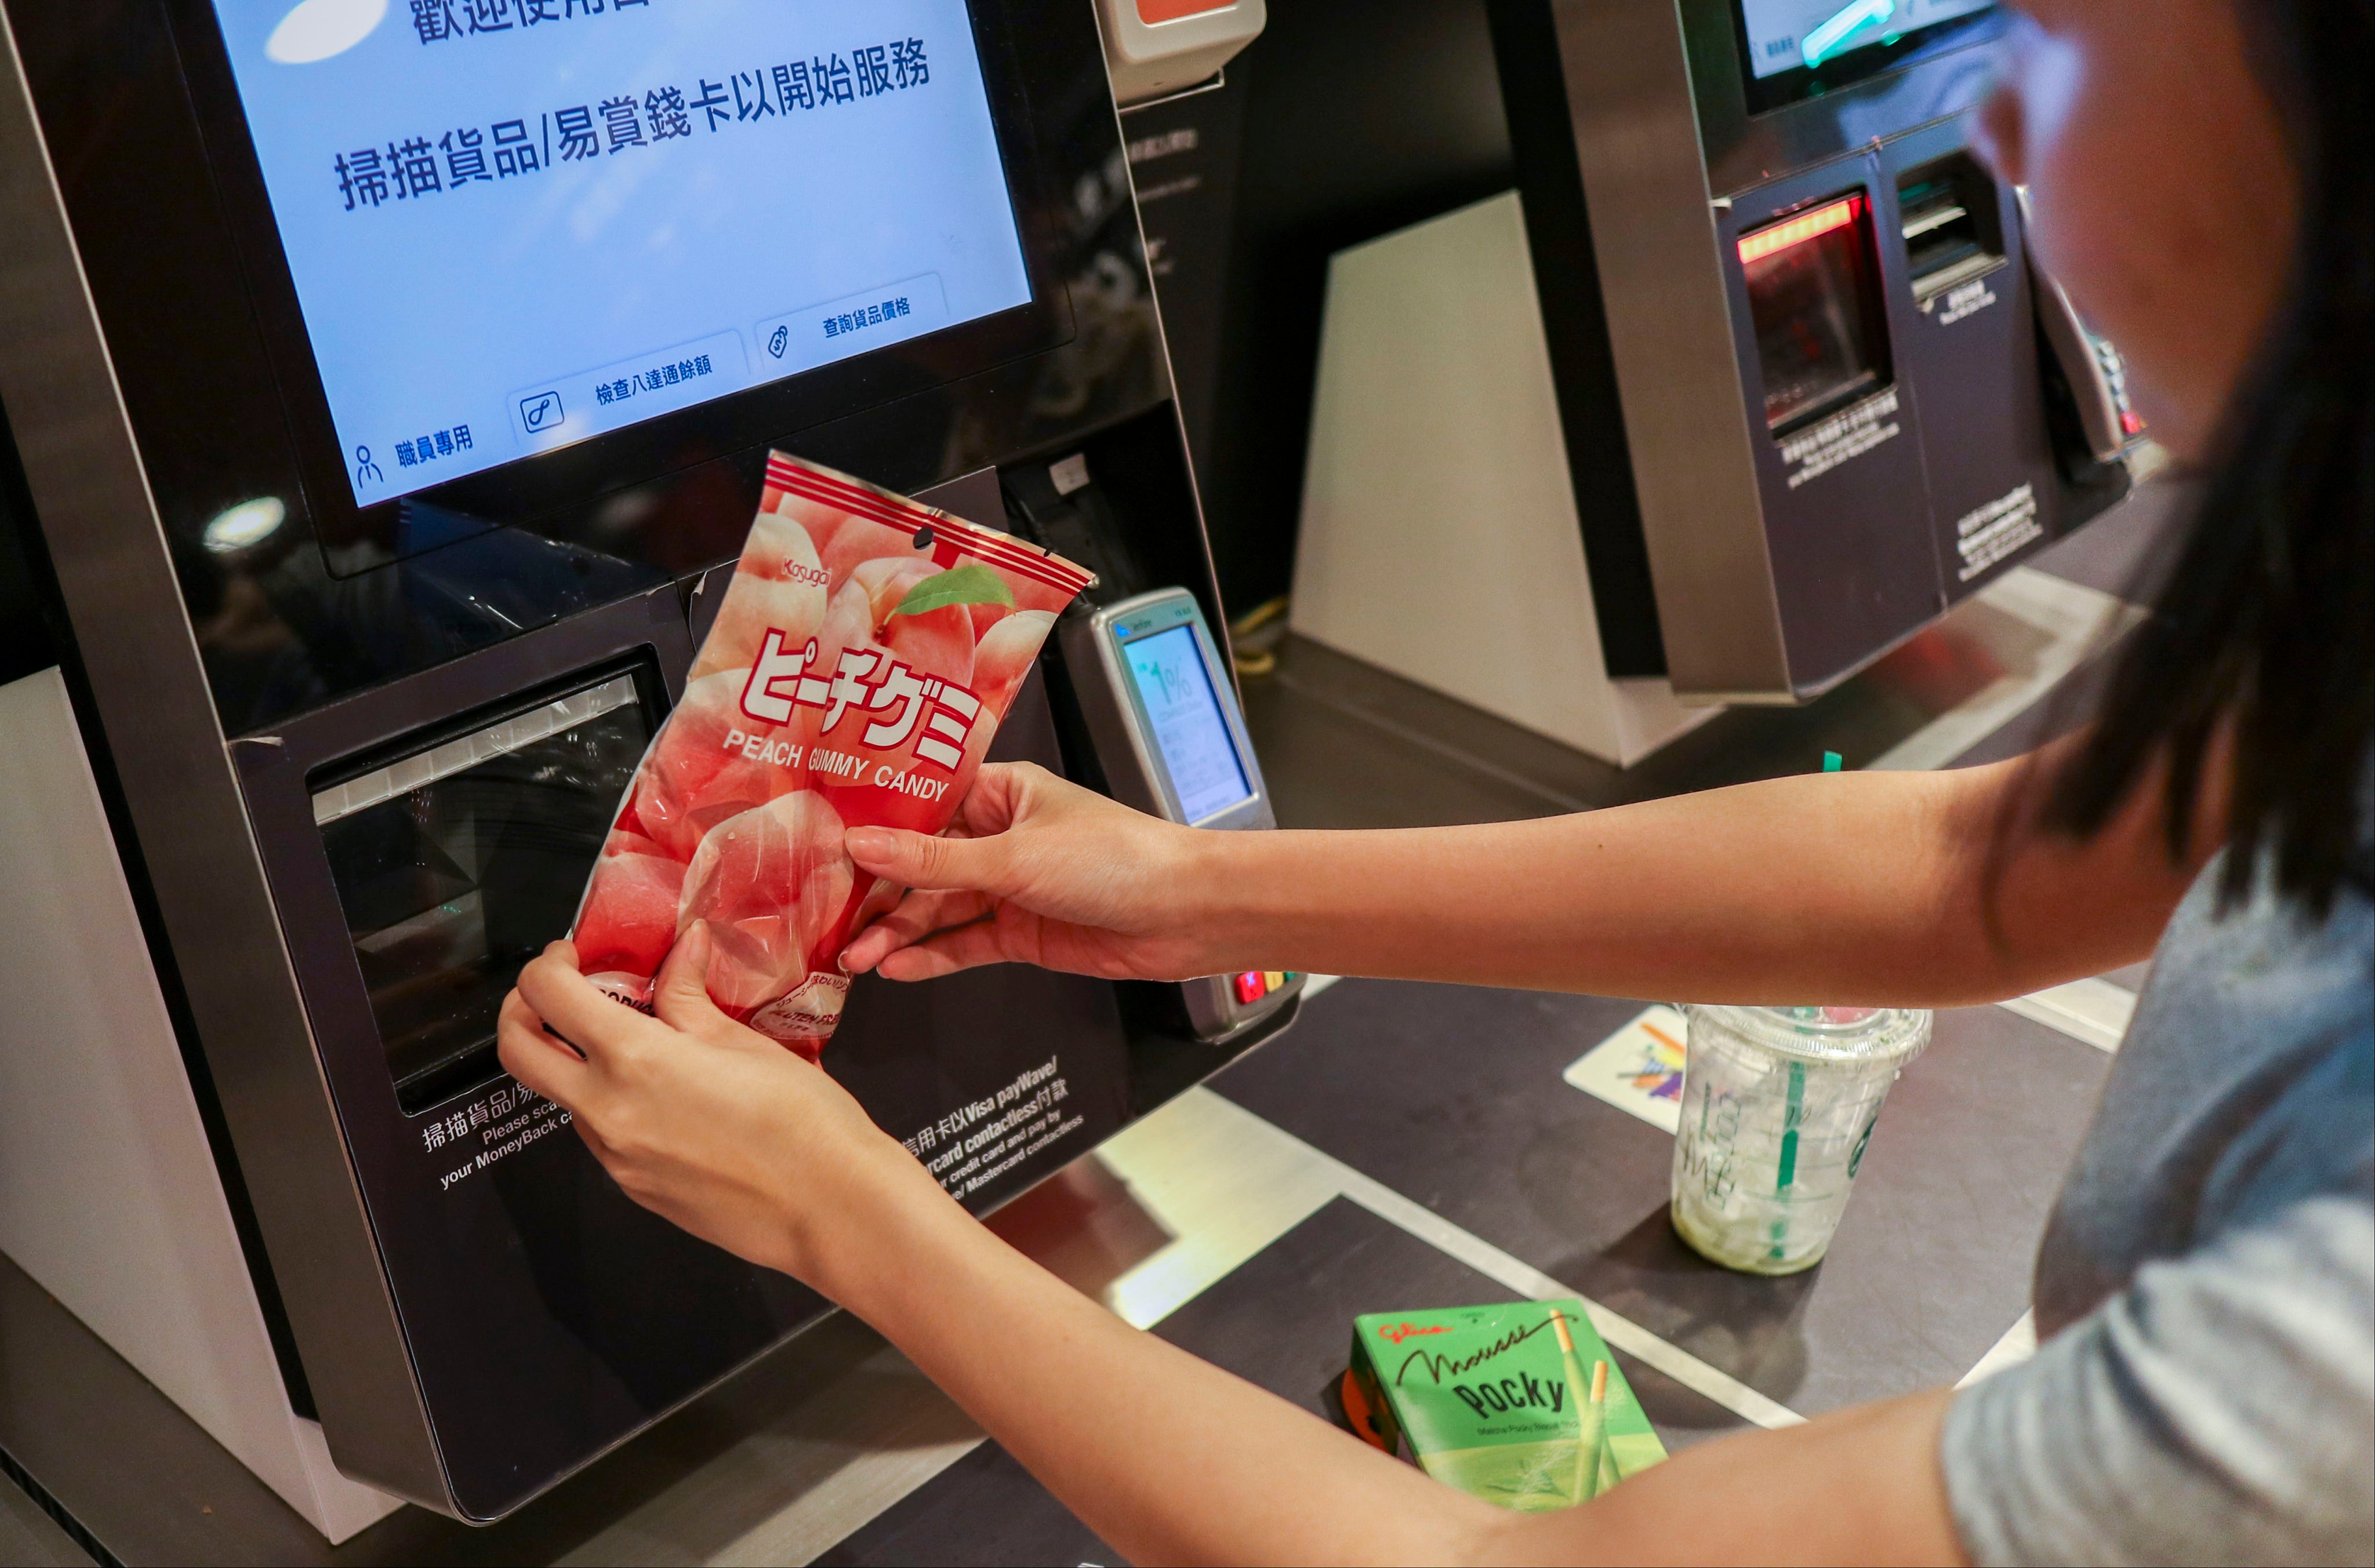 A shopper buys goods at a self-checkout machine at the Taste supermarket in Amoy Plaza, Kowloon Bay, Hong Kong. Self-checkouts and self-ordering have become commonplace in the city, but can create problems. Photo: Roy Issa